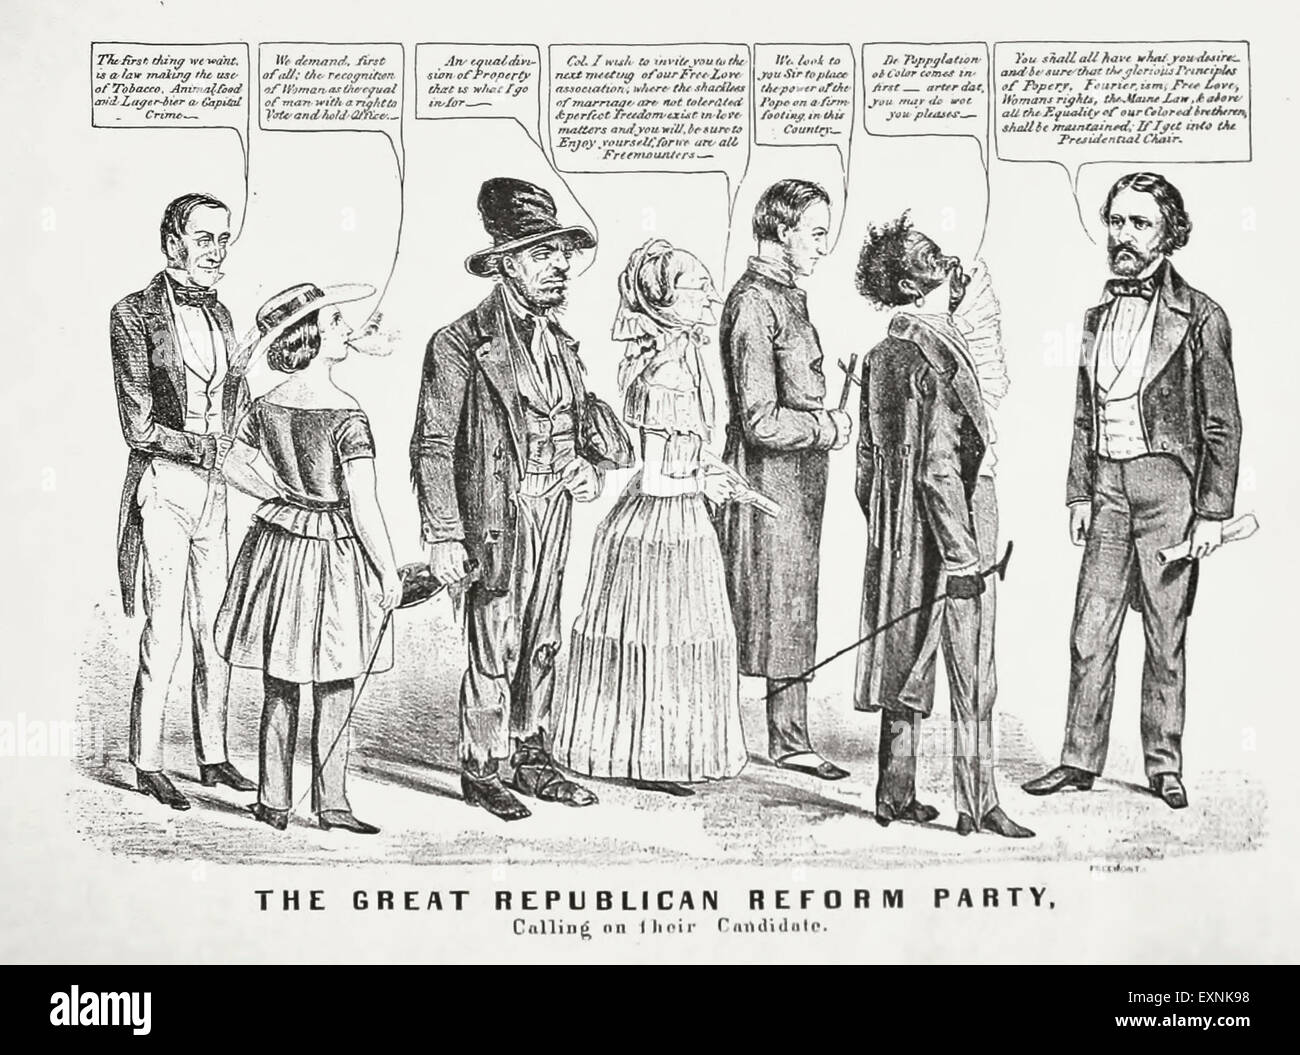 USA Presidential election of 1856 - Republican Party Candidate John Fremont taking calls from advocates of 'popery', free love Fourrierism, Racial Equality andWomen's Rights.  Political cartoon Stock Photo